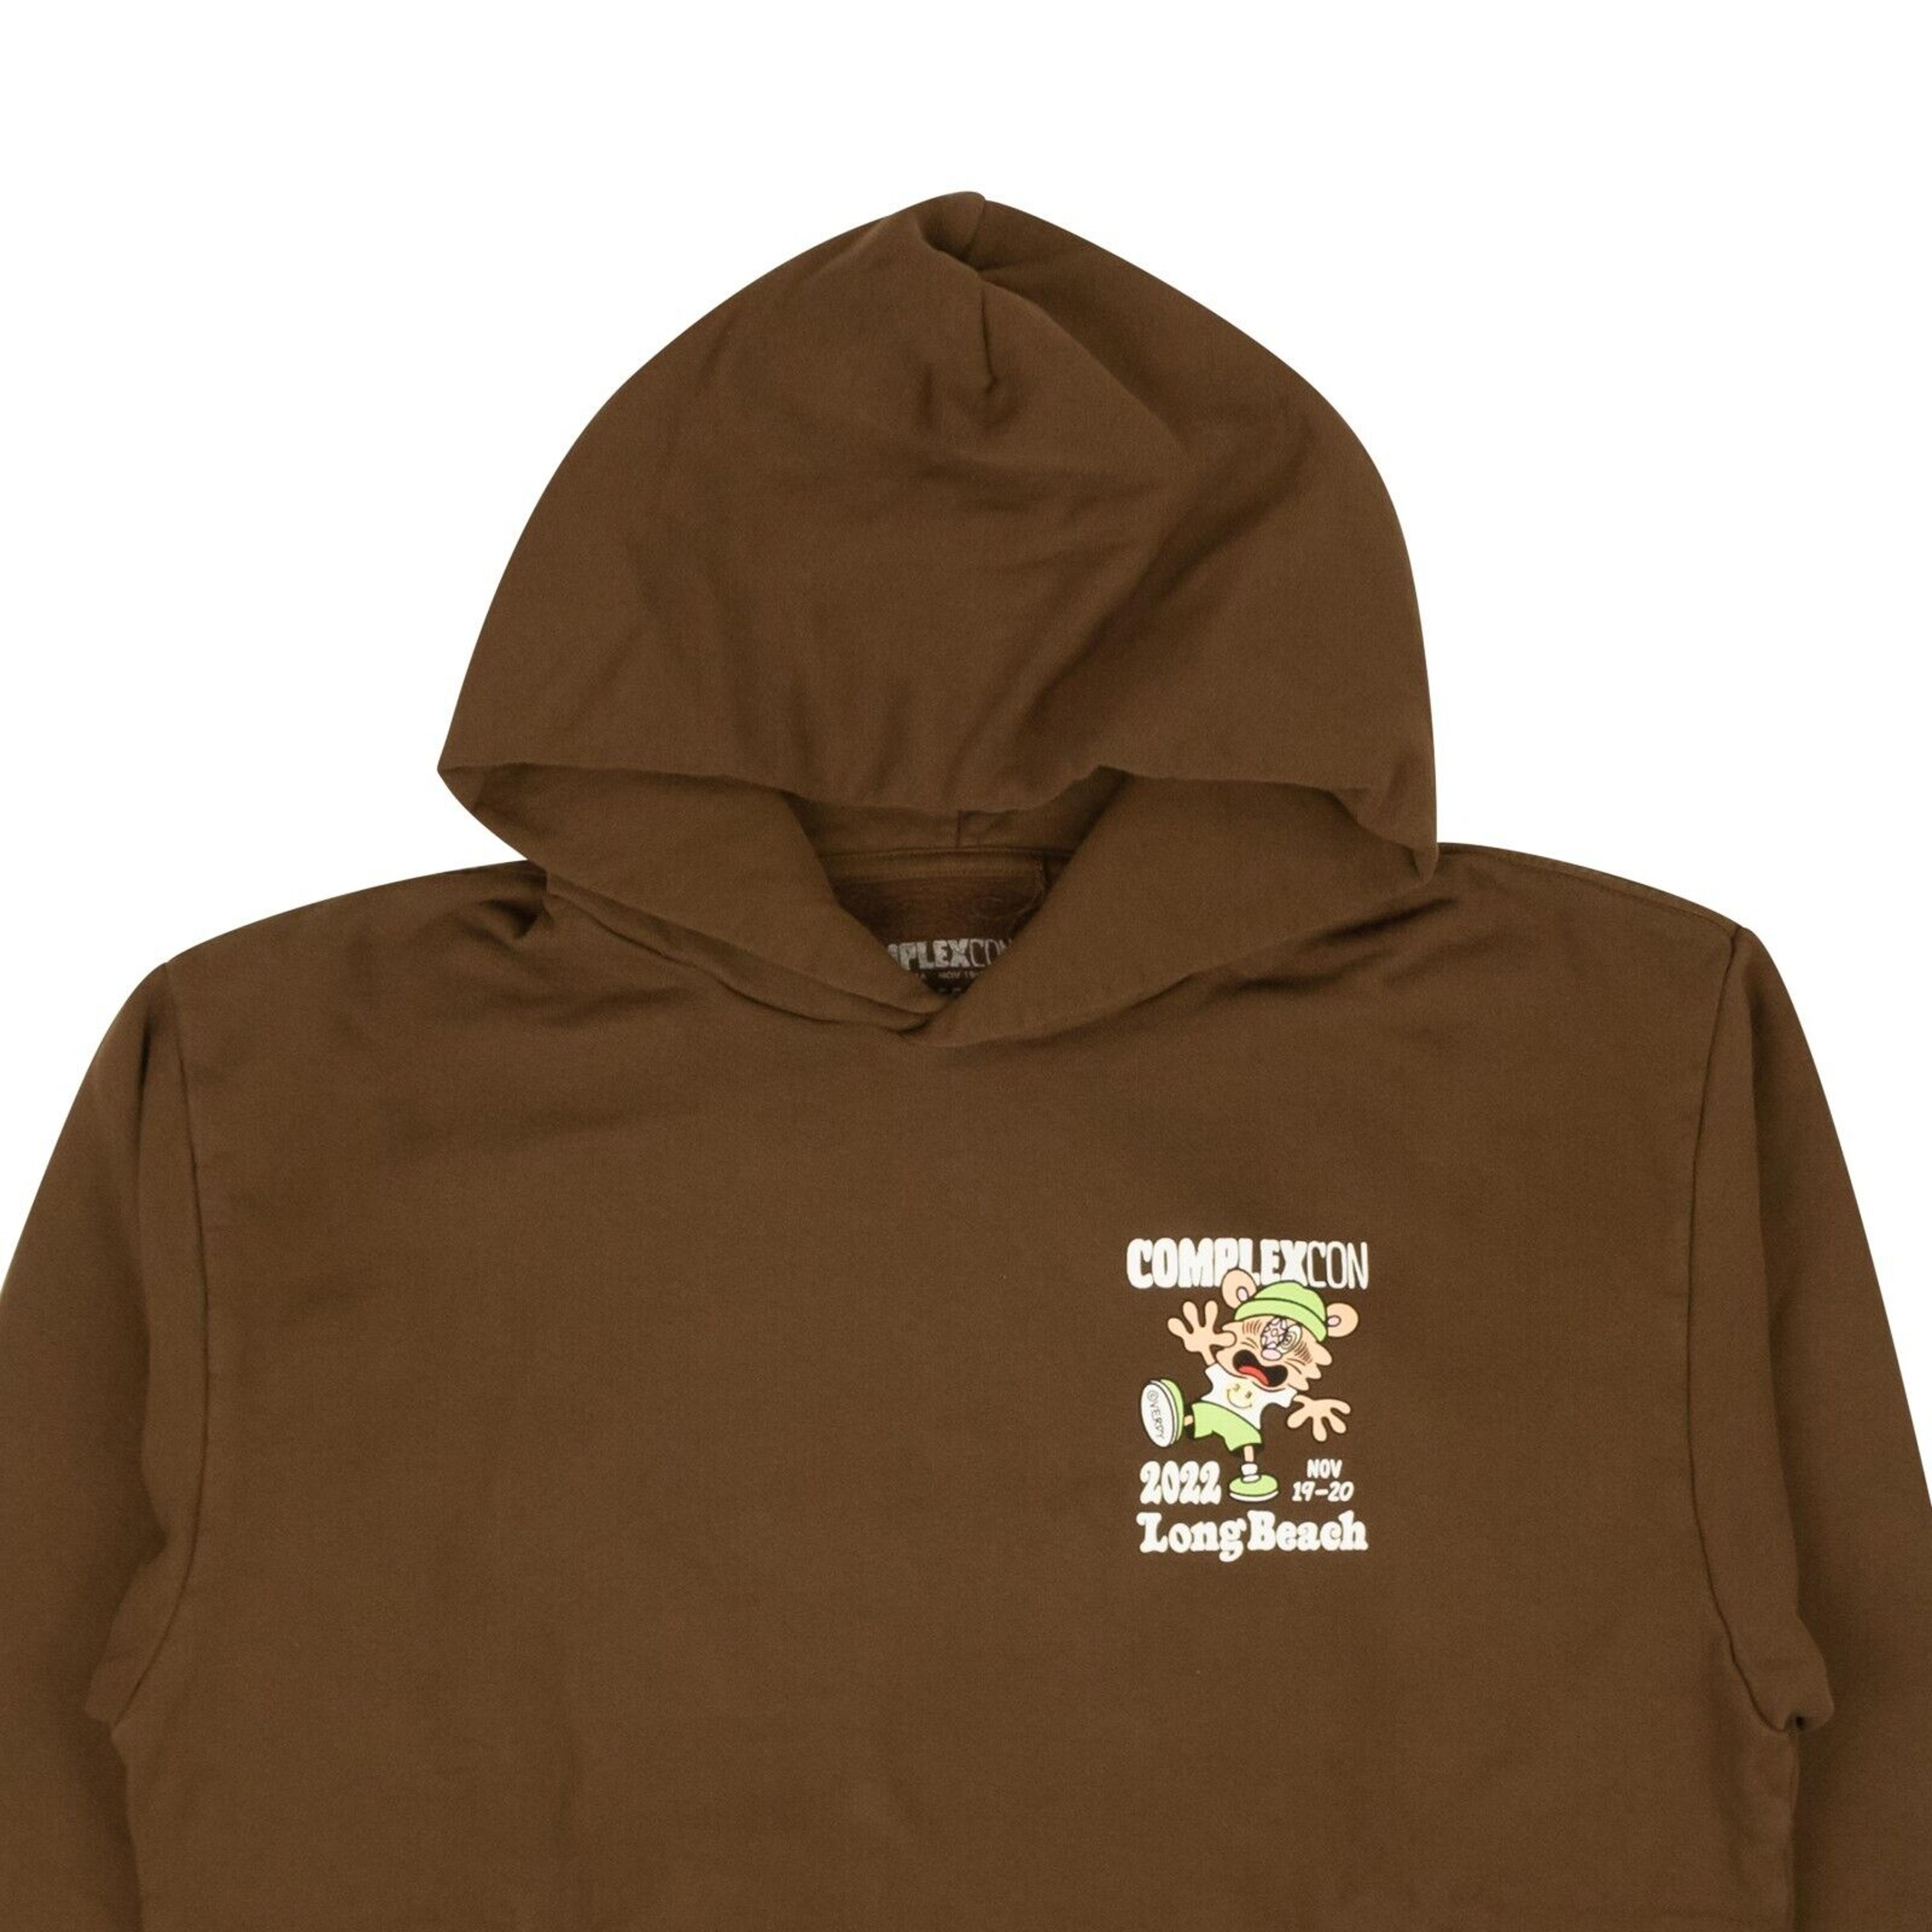 Alternate View 1 of Complexcon X Verdy Hoodie - Brown